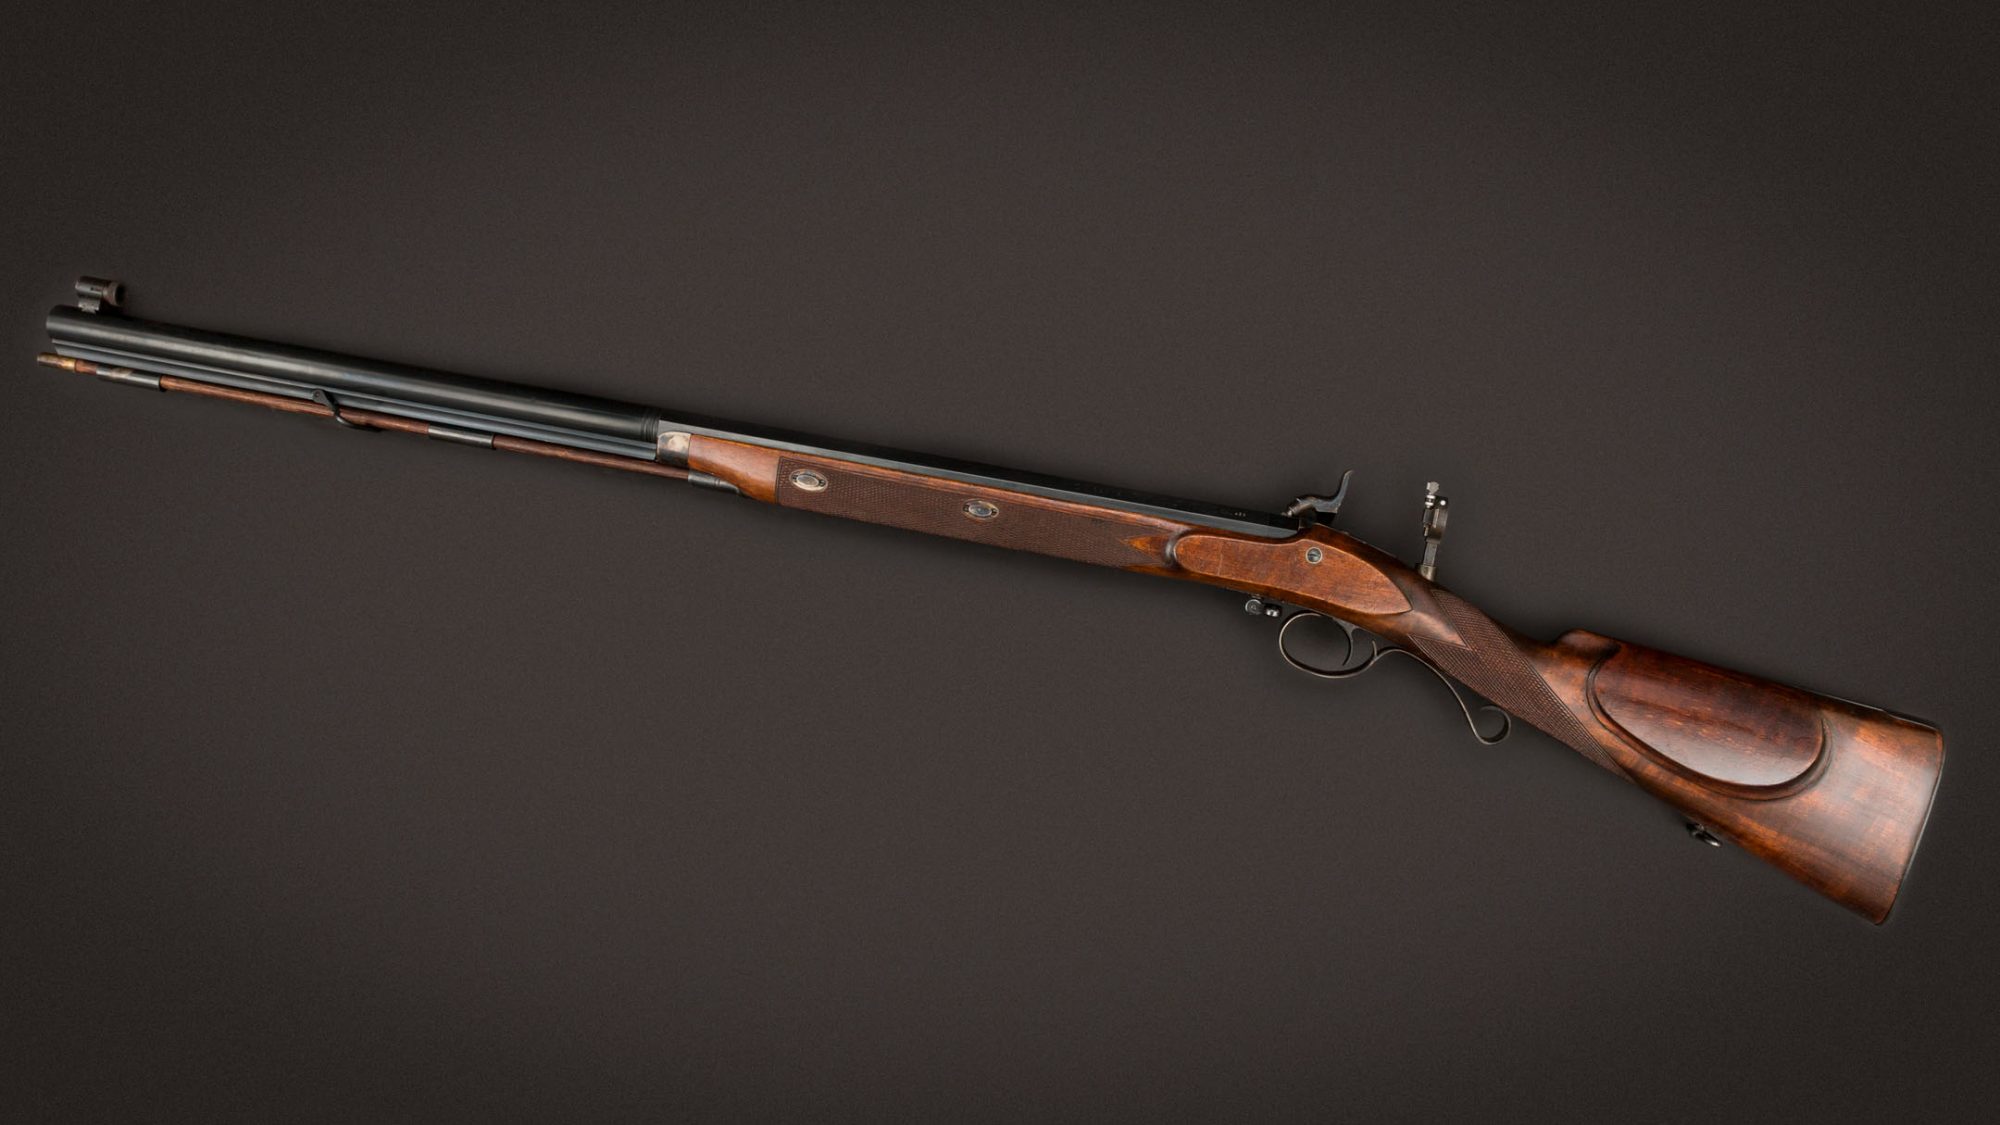 Pedersoli Mortimer 58 Caliber Percussion Rifle, for sale by Turnbull Restoration of Bloomfield, NY